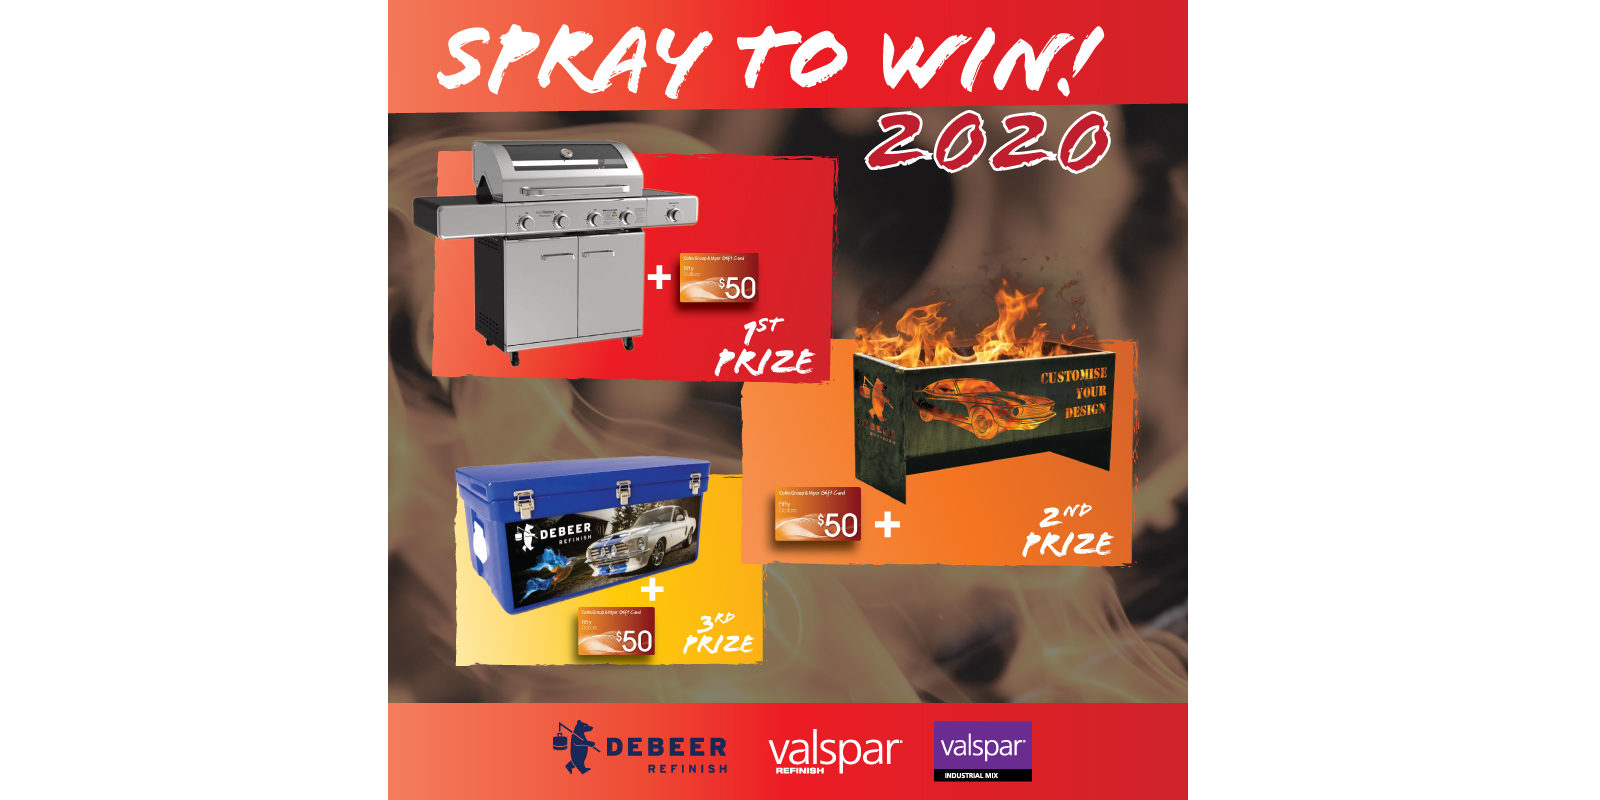 Spray To Win 2020 With DeBeer And Valspar